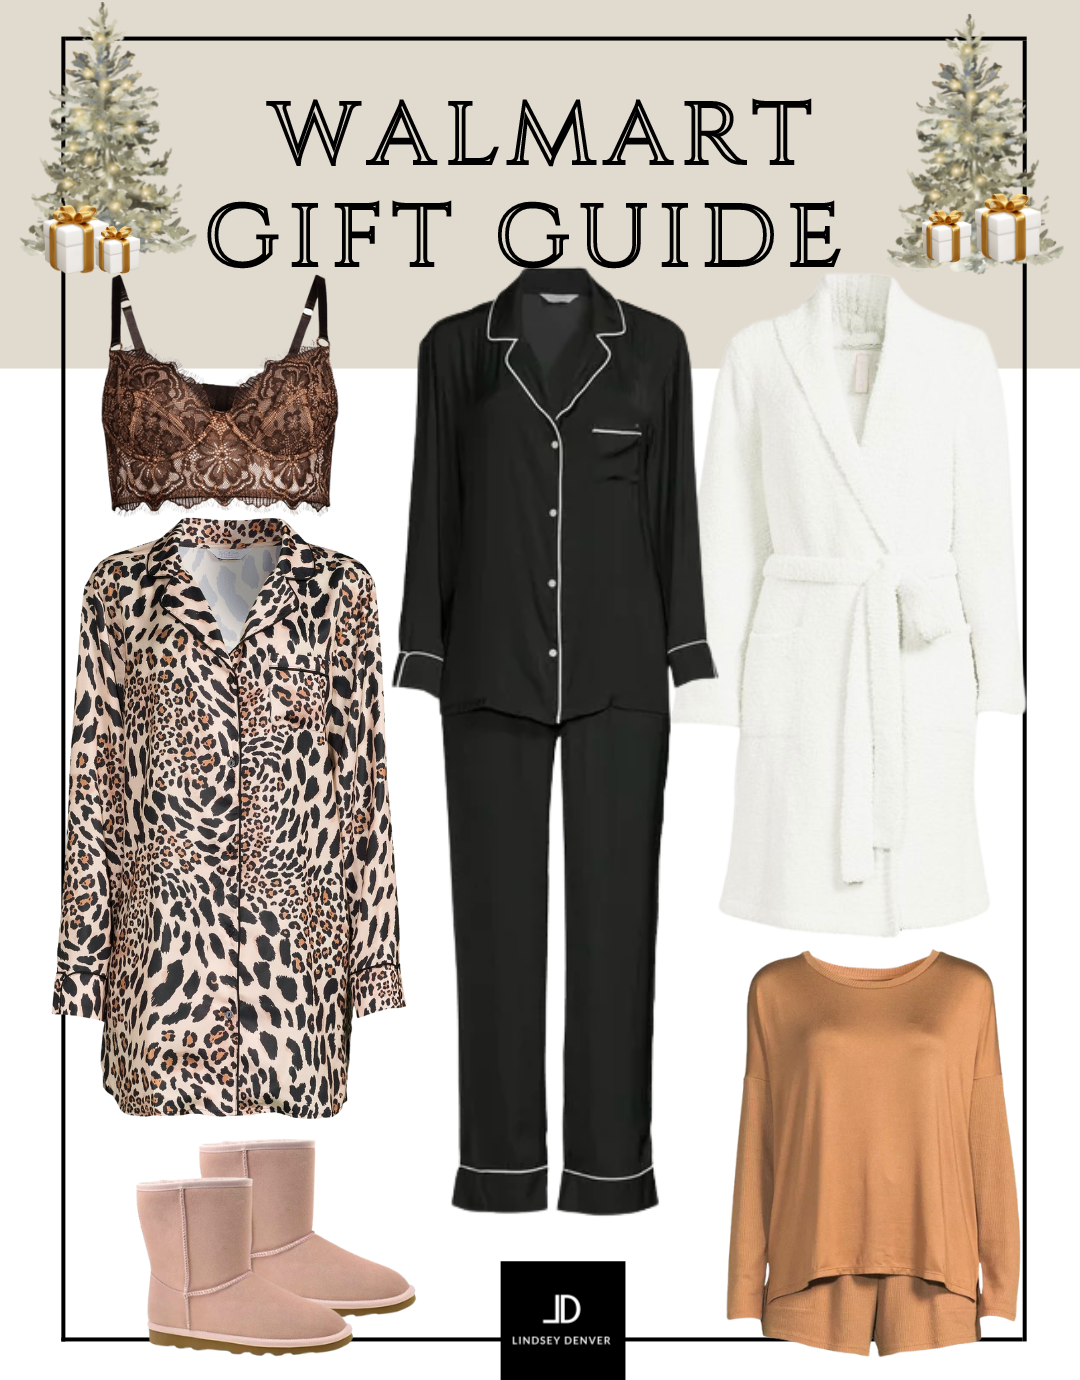 Walmart gift guide for her.